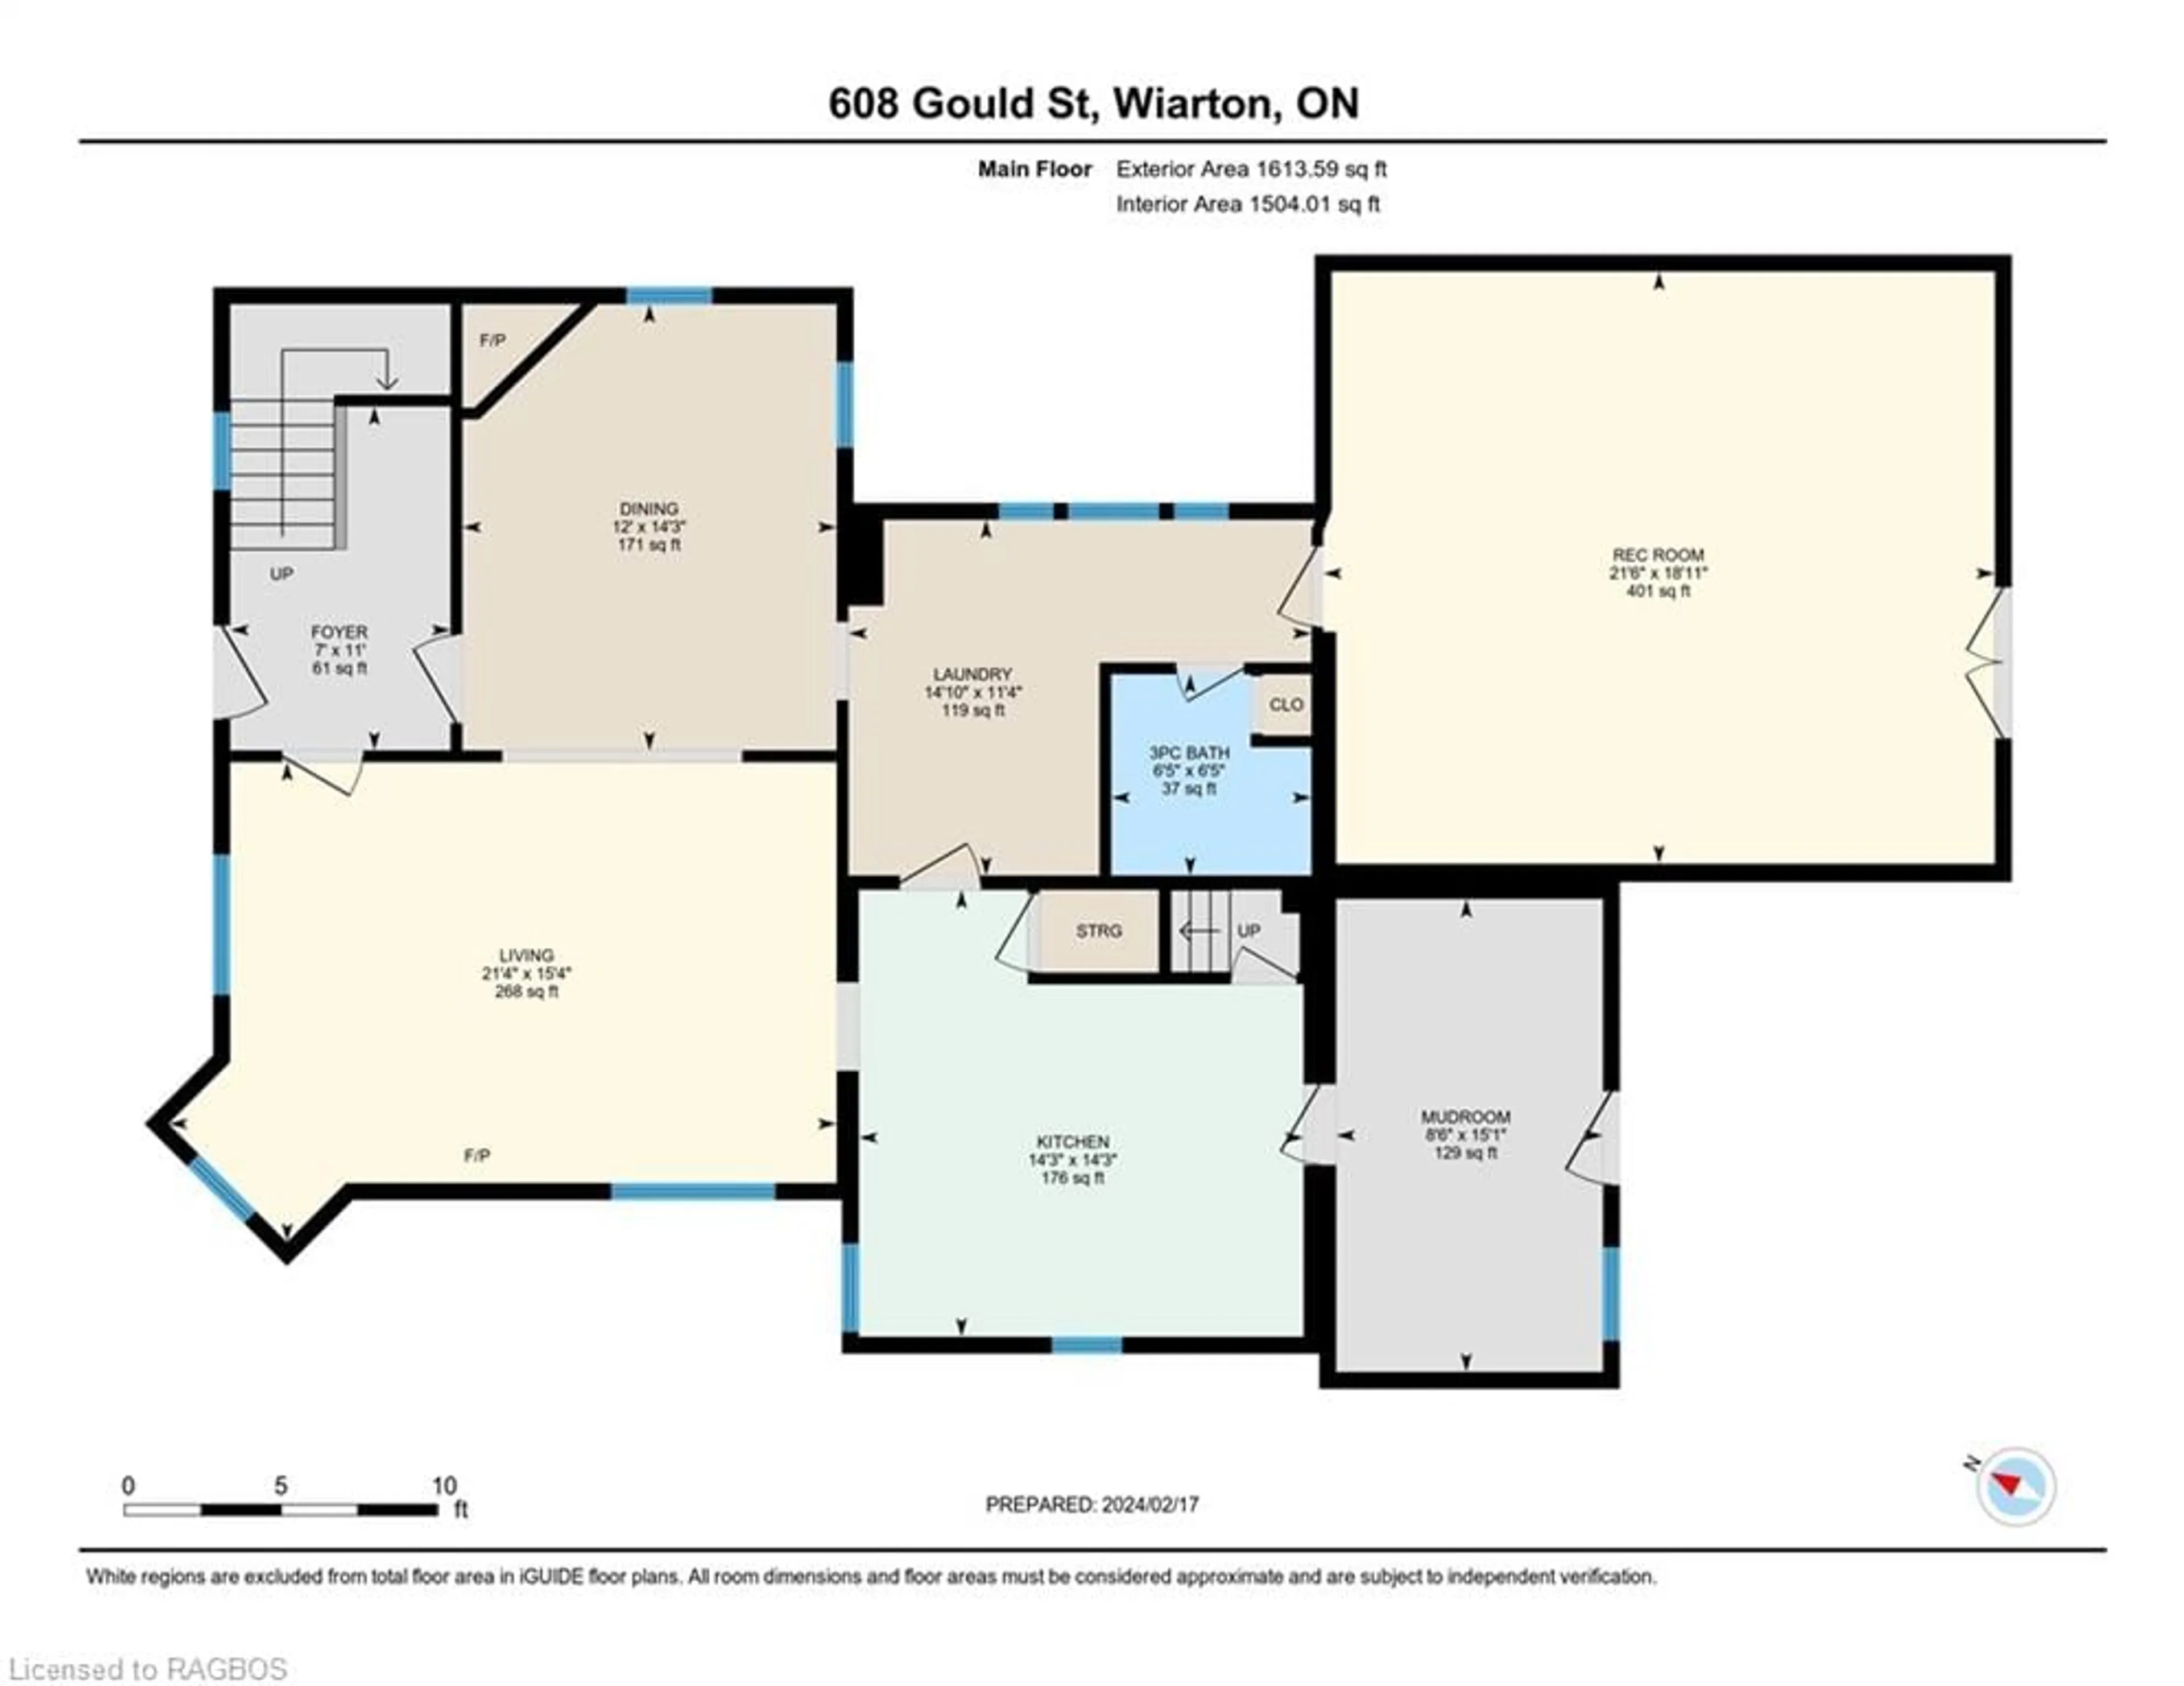 Floor plan for 608 Gould St, Wiarton Ontario N0H 2T0